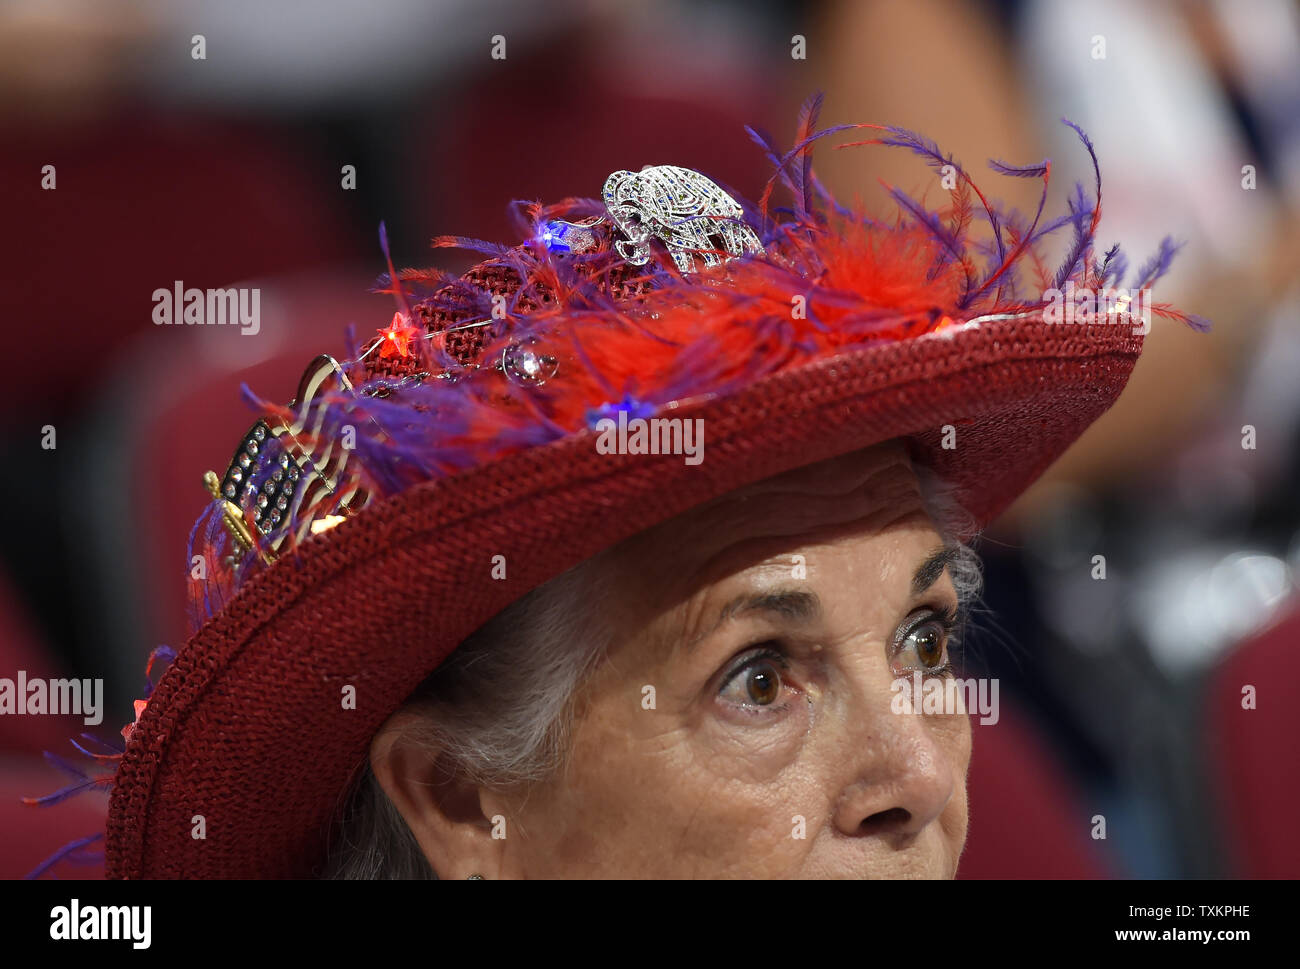 A GOP elephant adorns a delegates' hat at the Republican National Convention at Quicken Loans Arena in Cleveland, Ohio on July 18, 2016.  Donald Trump will formally accept the Republican Party's nomination for President on Thursday night July 21st.  Photo by Molly Riley/UPI Stock Photo